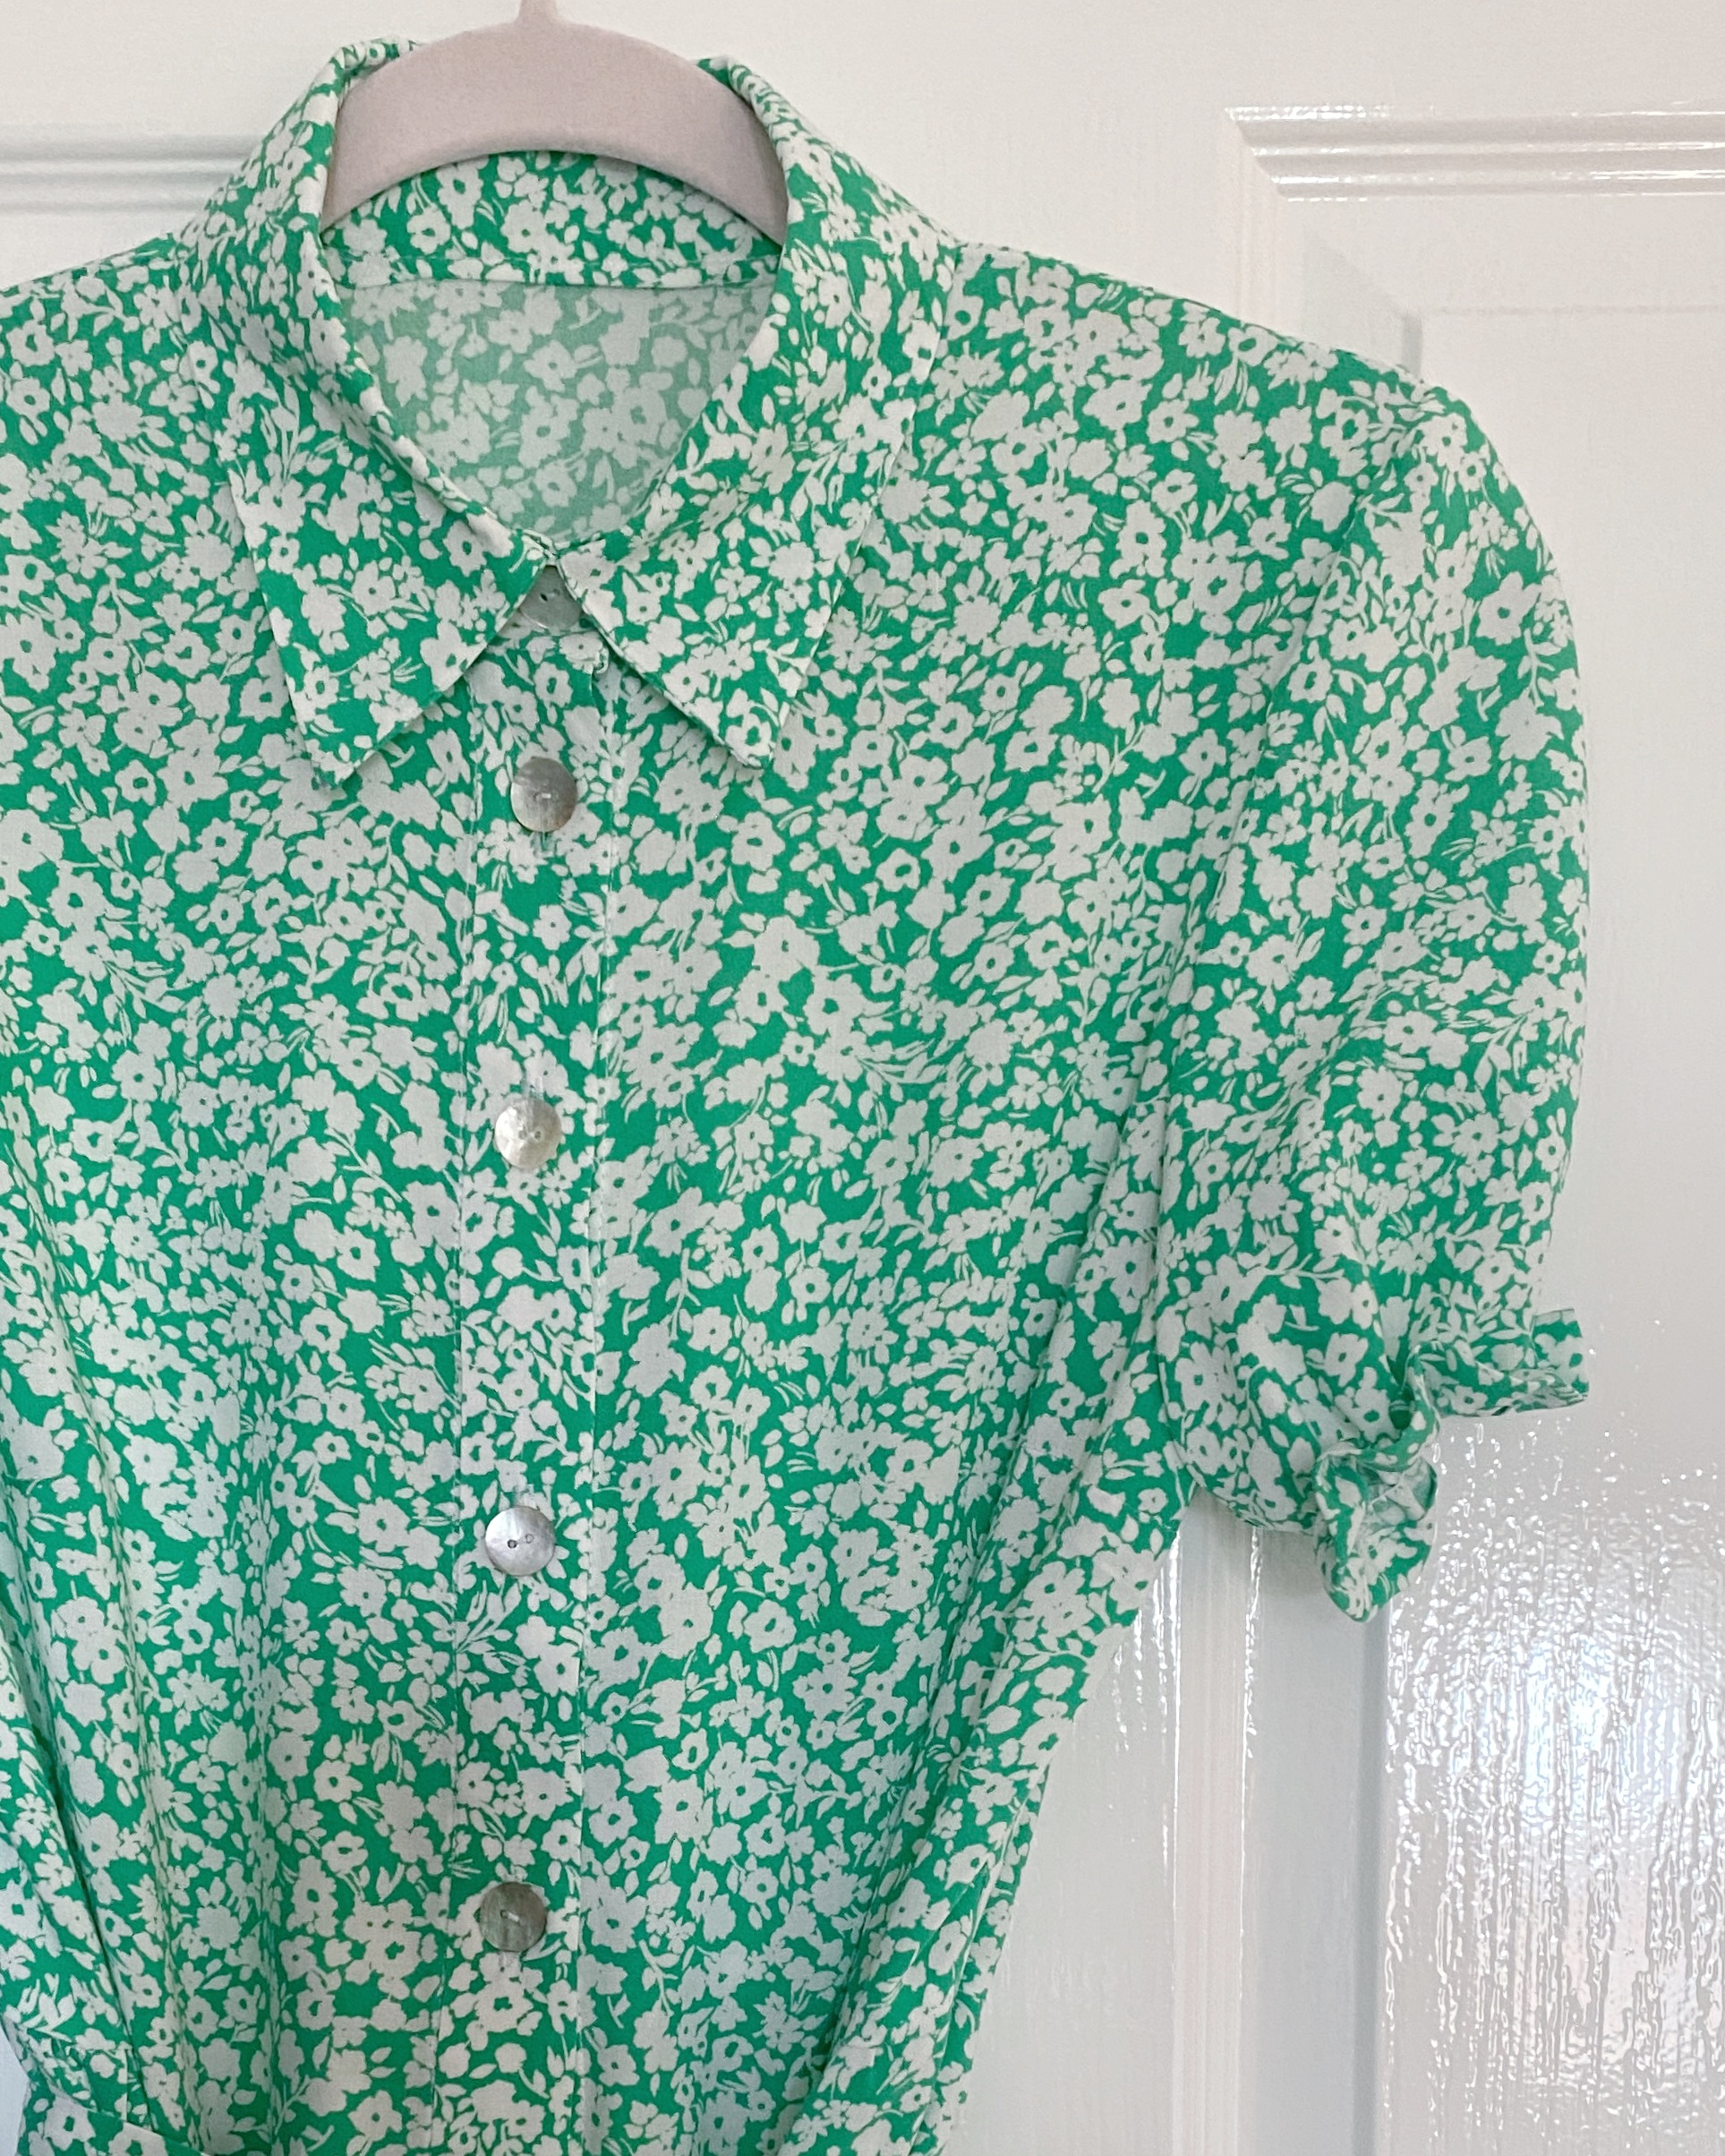 How I hacked the Lyra Dress pattern to make a fully button down shirt ...